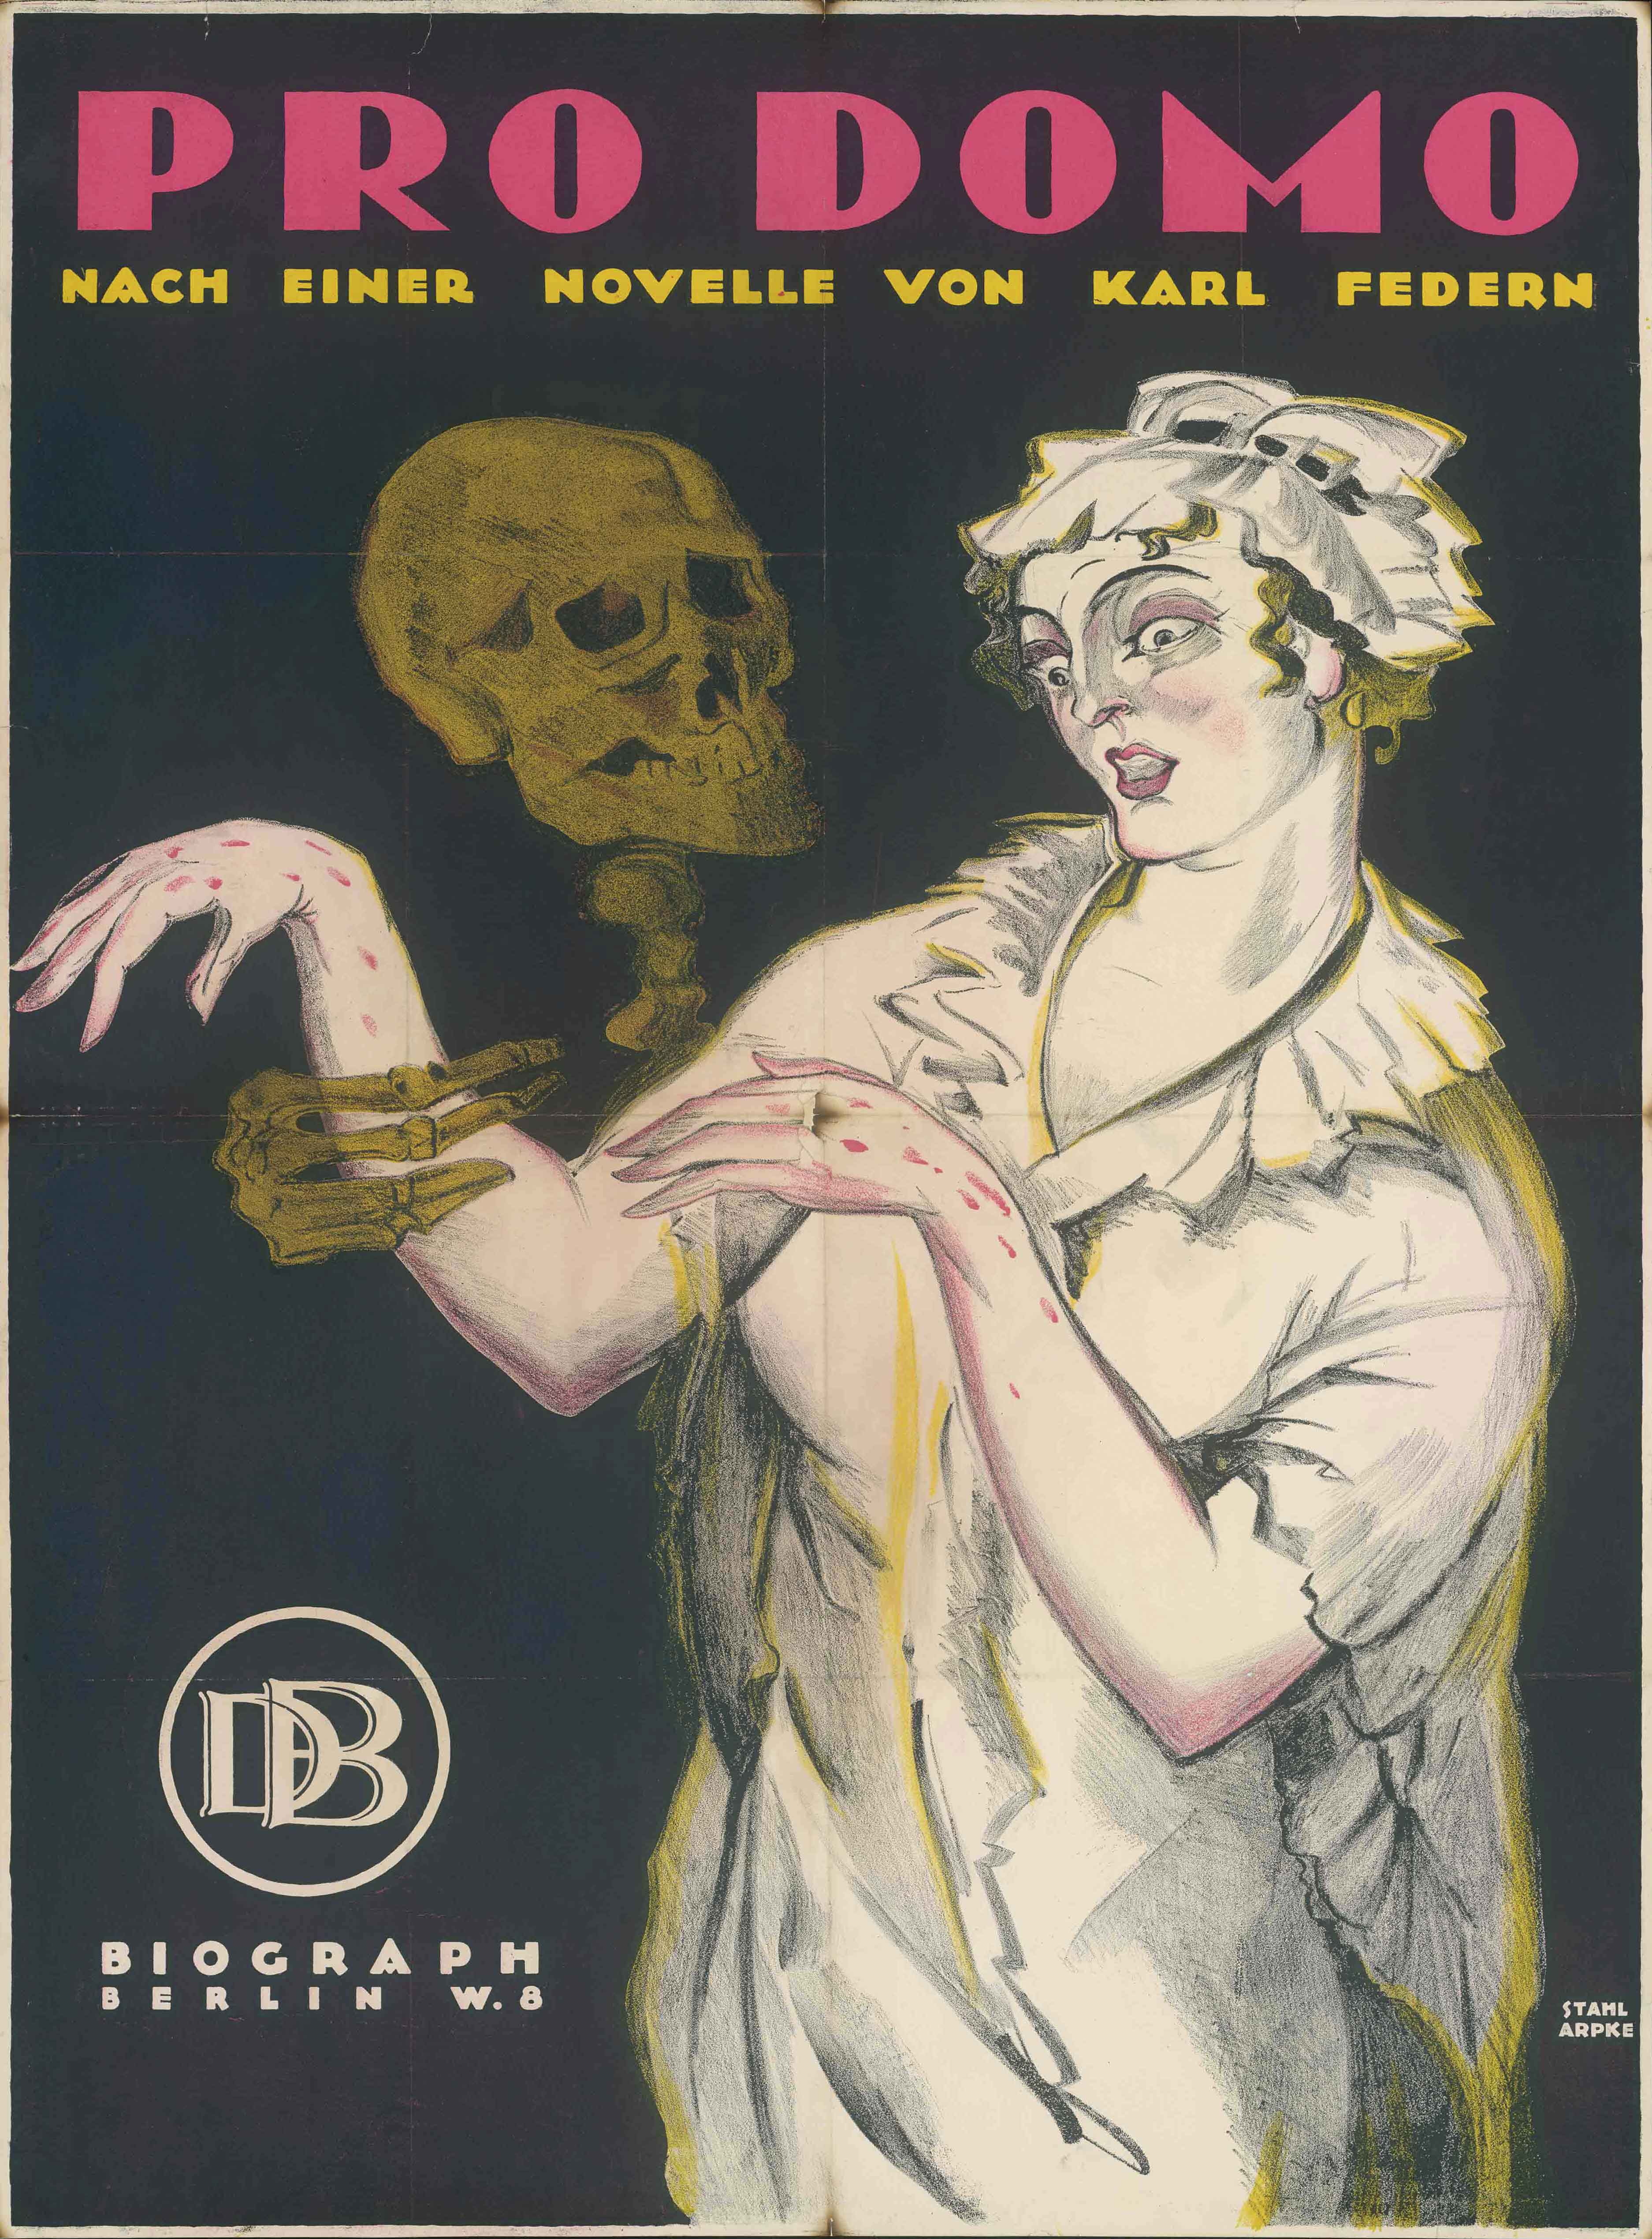 Film poster for Pro Domo, Germany 1916